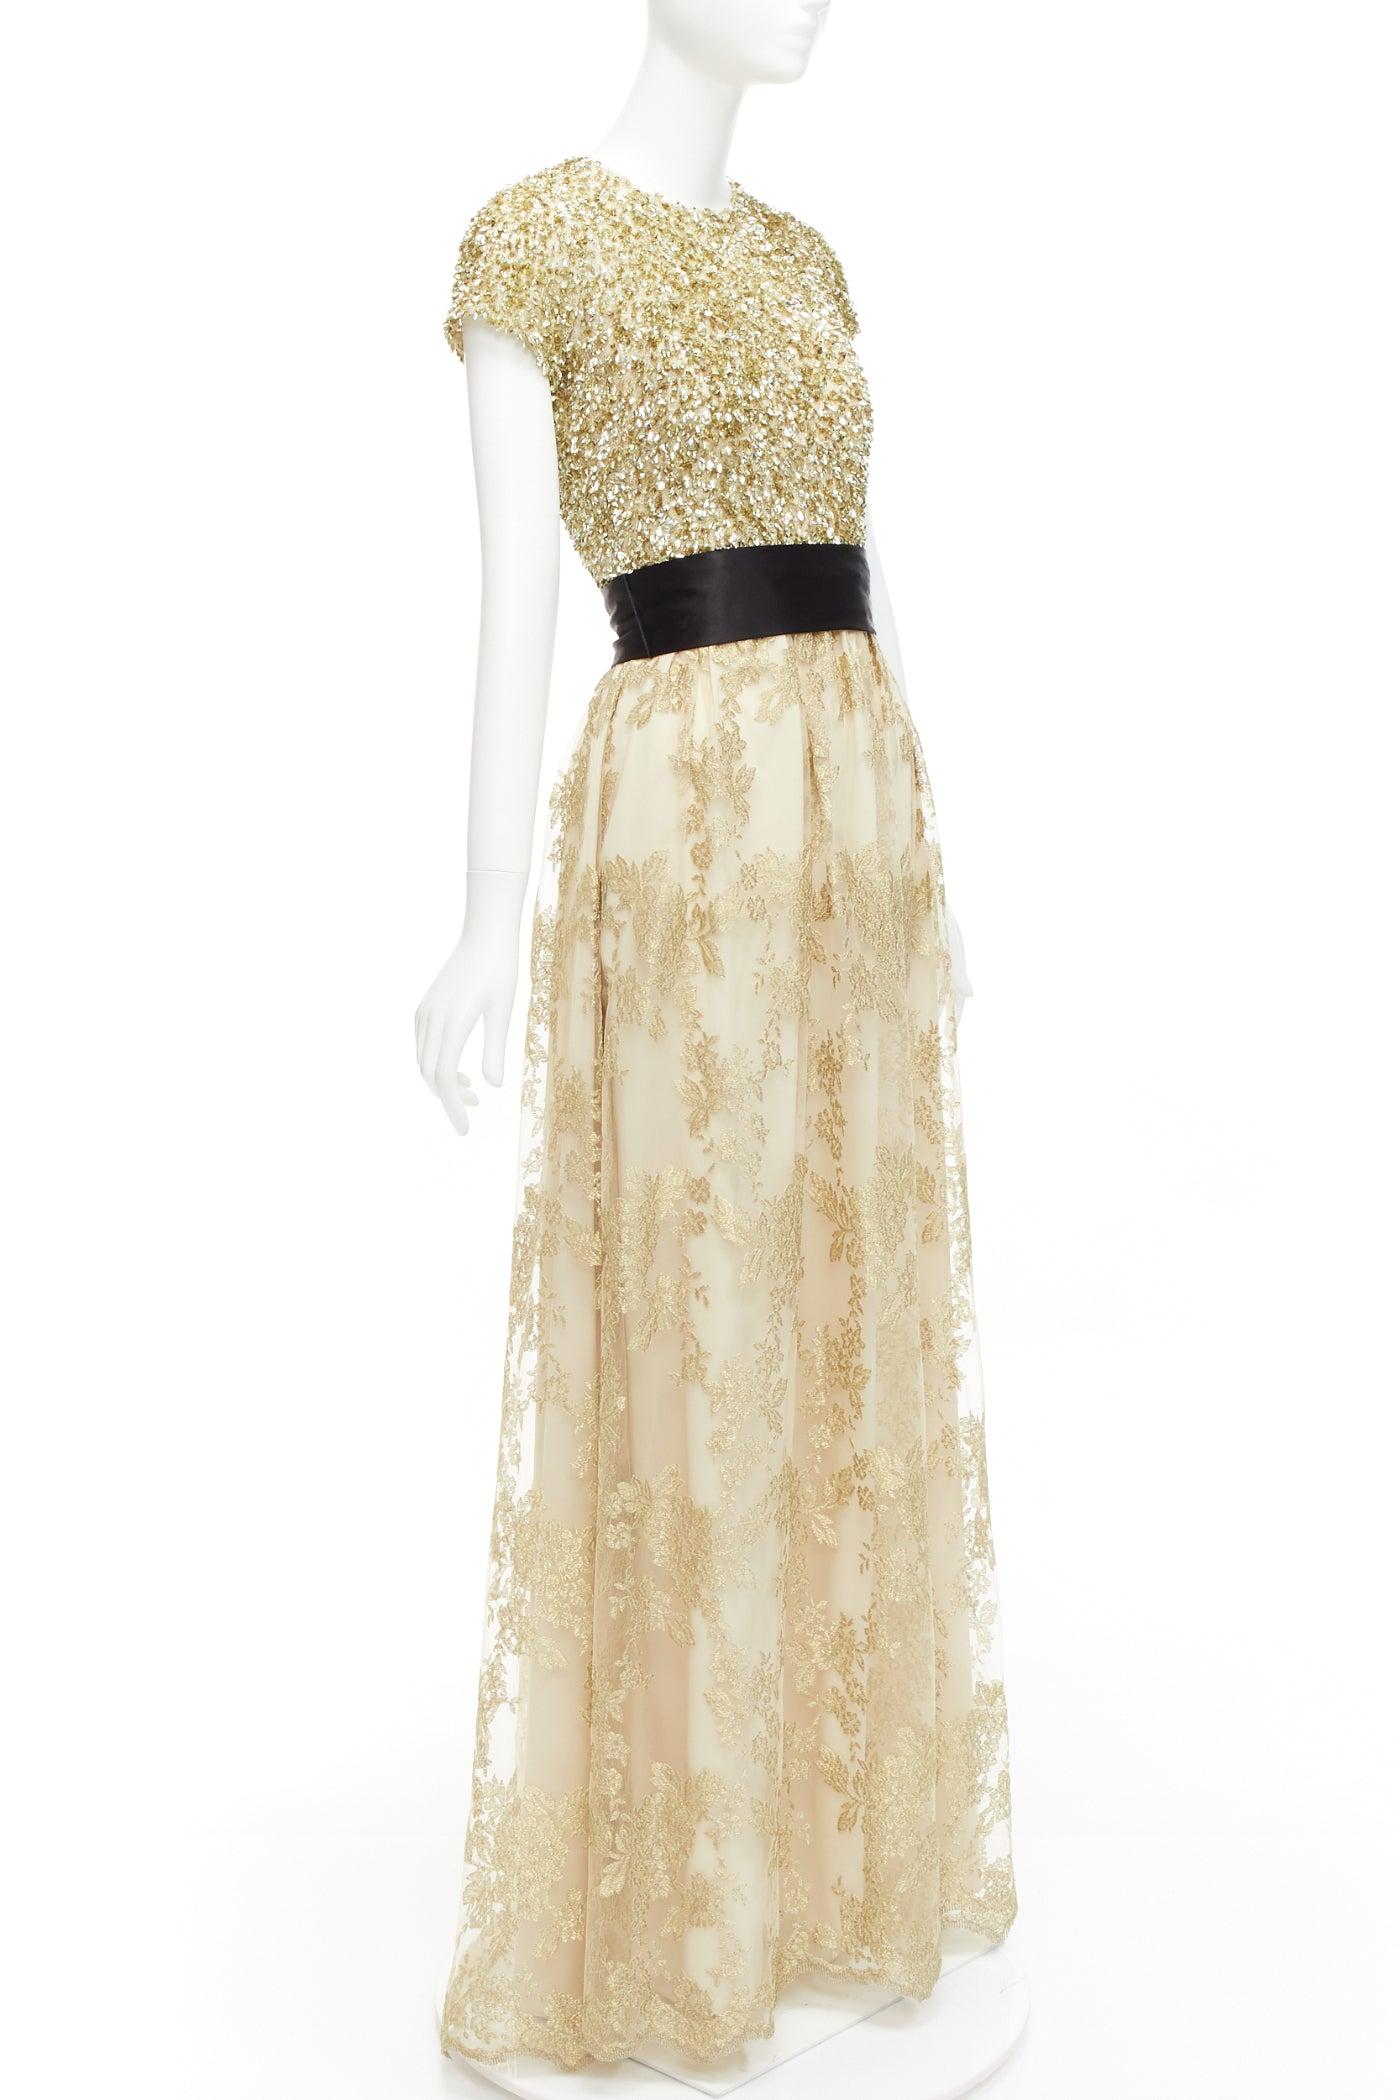 BADGLEY MISCHKA gold sequins top floral lace overlay belted gown dress US6 M In Good Condition For Sale In Hong Kong, NT